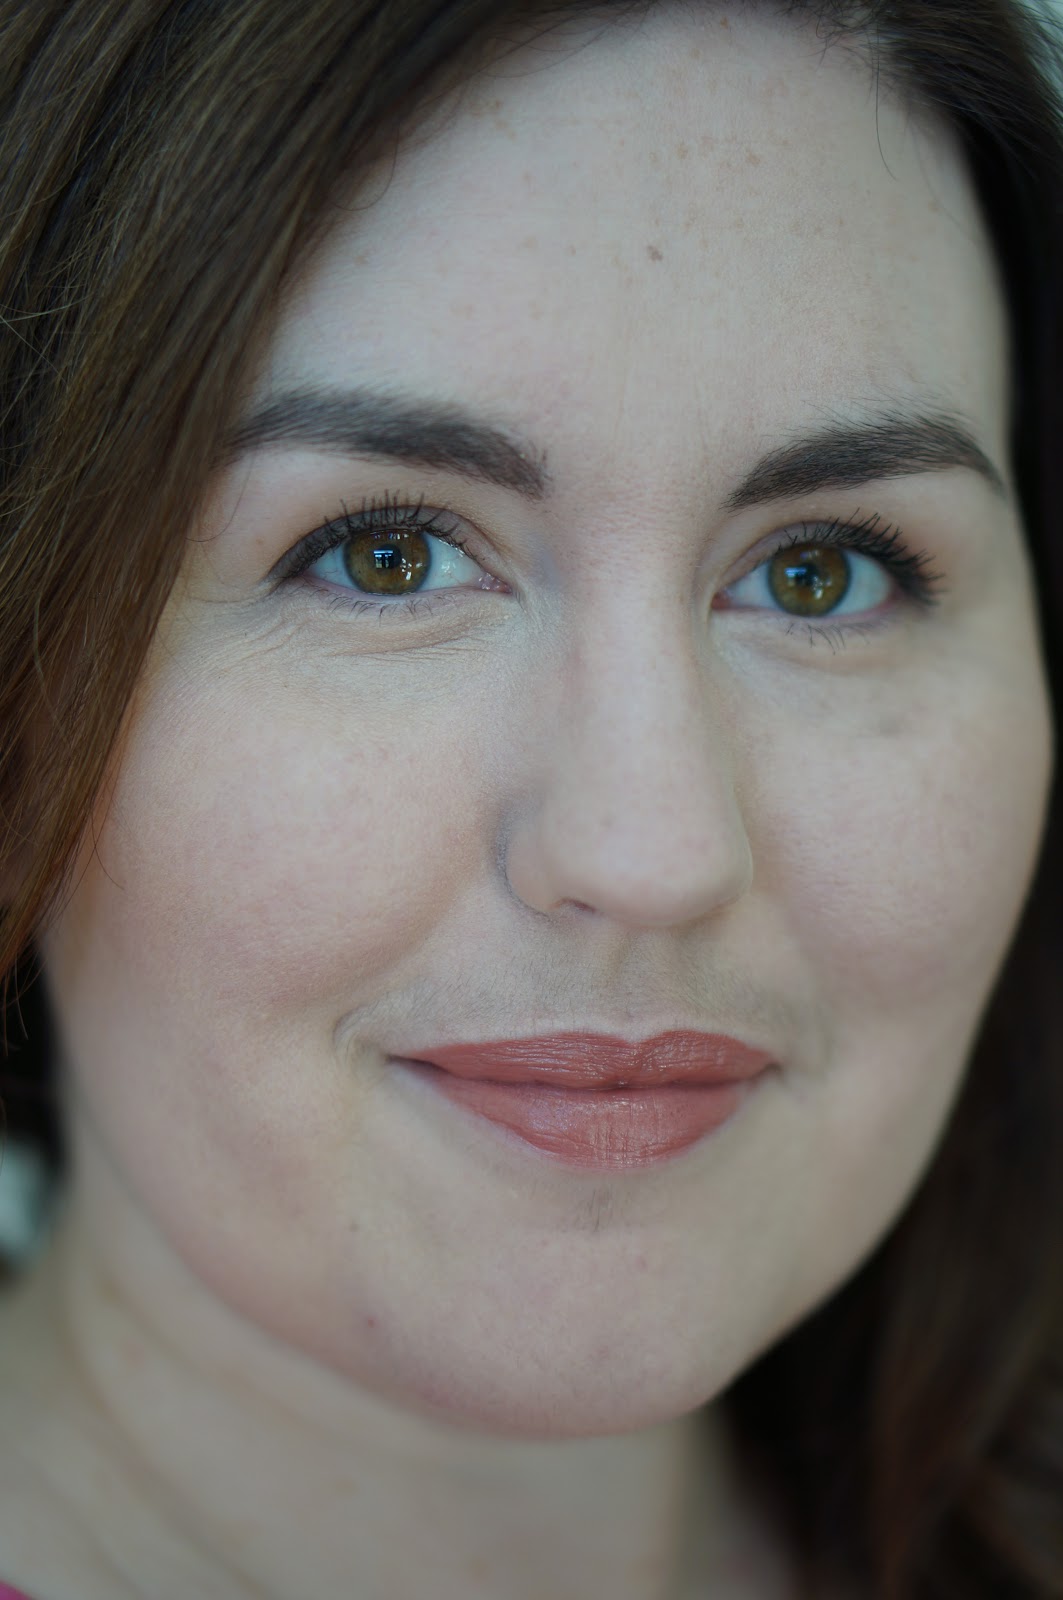 Popular North Carolina style blogger Rebecca Lately tries out the NYX Total Control Drop Foundation. Click here to read her Foundation Friday post!